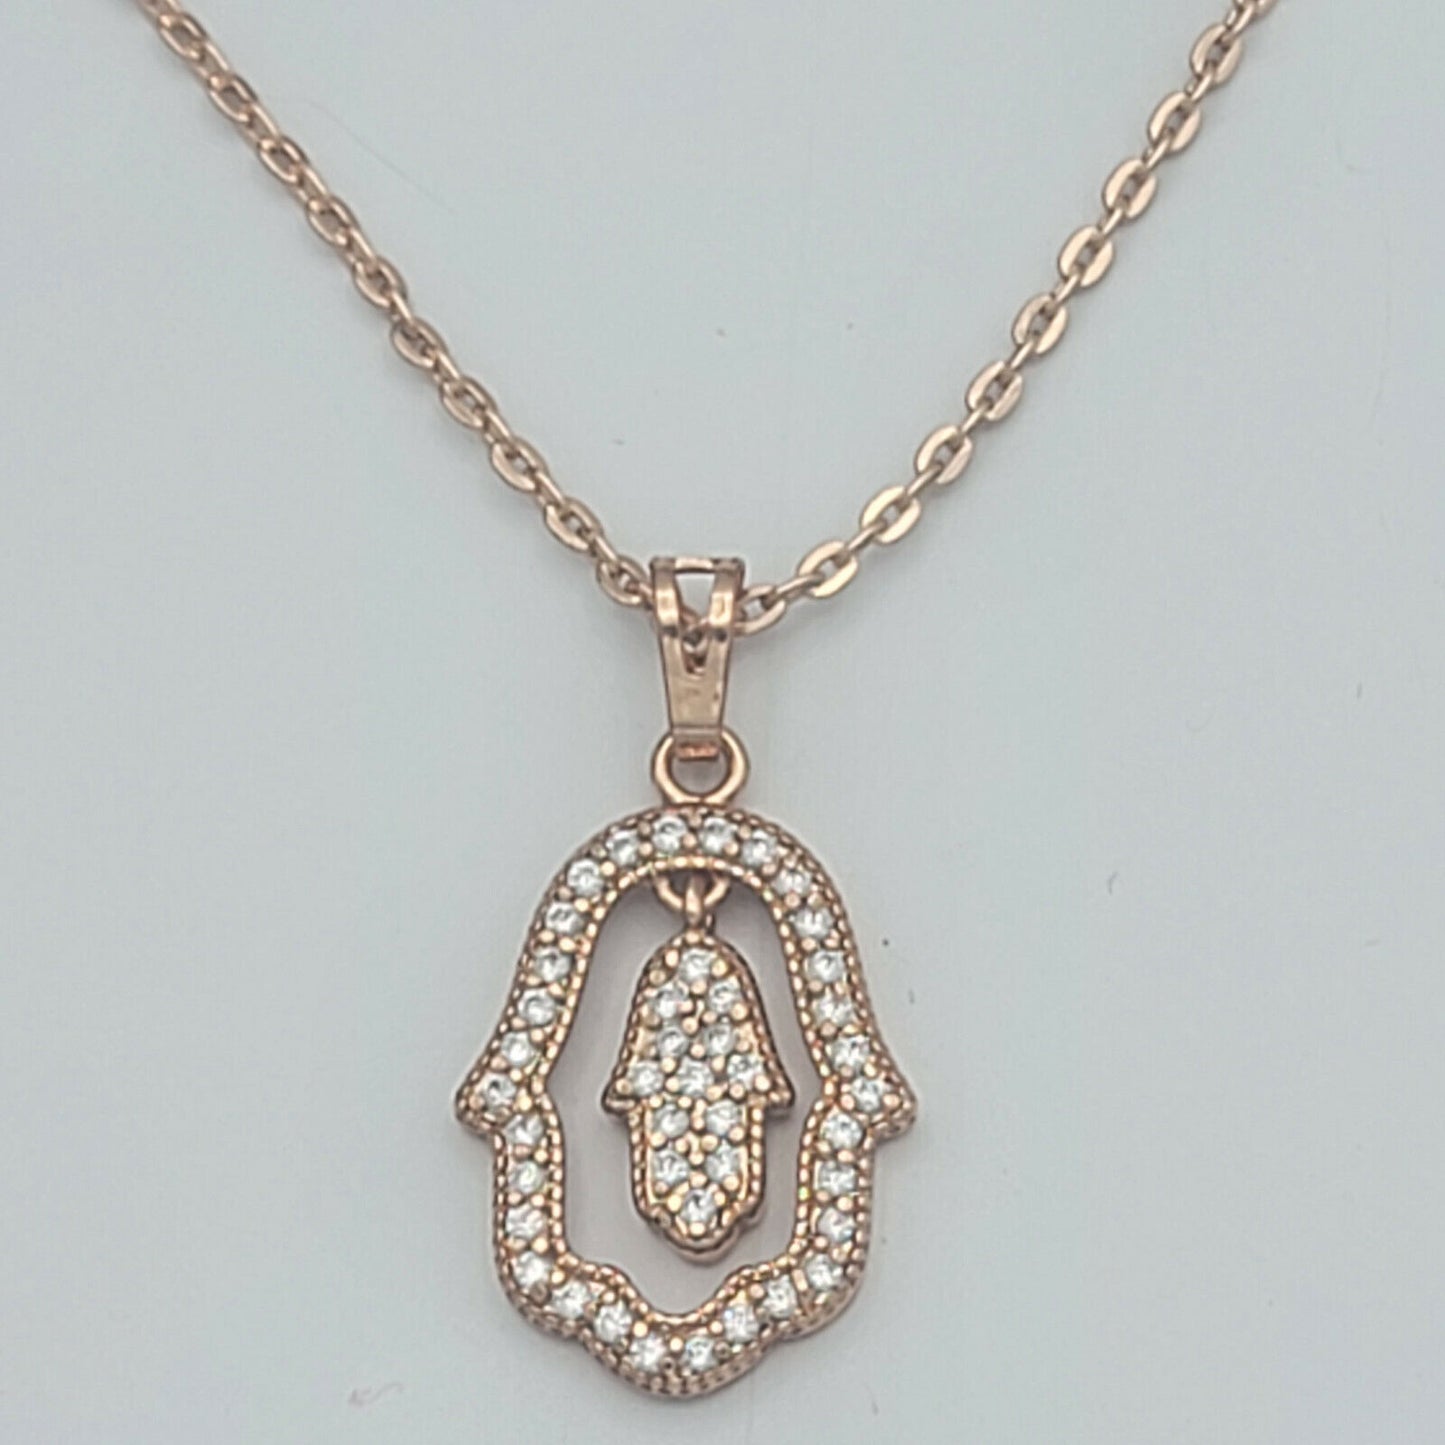 Necklaces - Rose Gold Plated. Hamsa Fatima Hand Movable Charm Pendant & Chain.